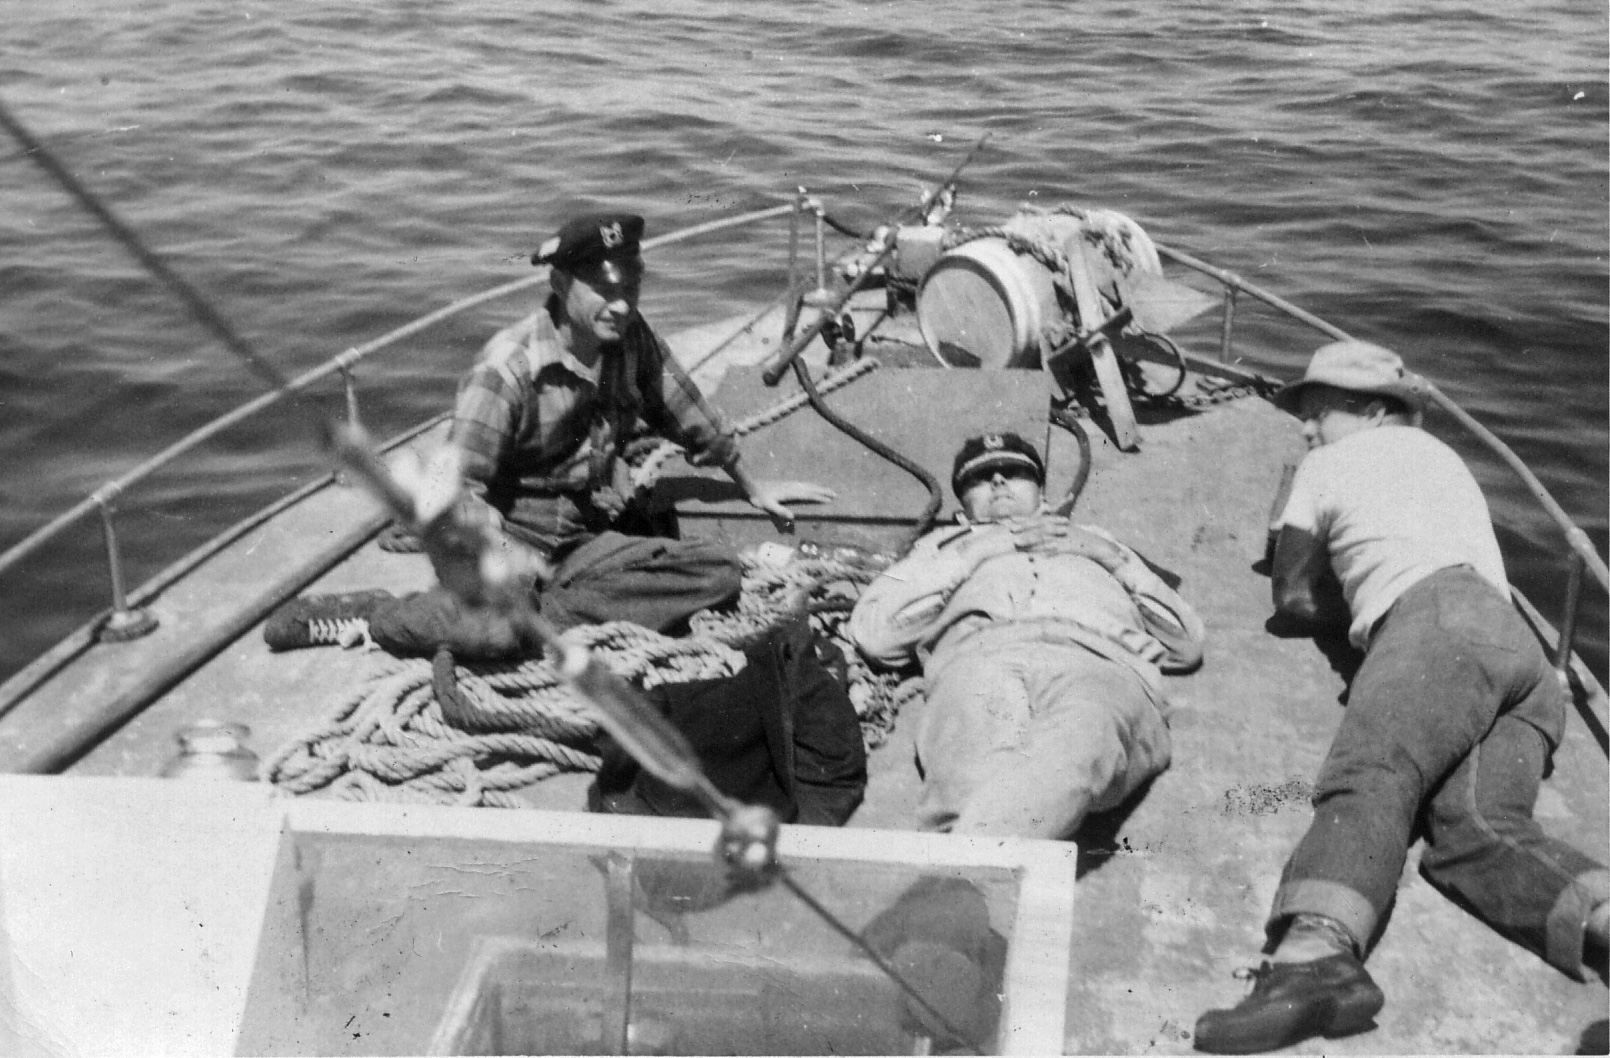 Grandpa Frank on the left and two of his buddies after a long day of fishing. Watch out for the buoy ahead. View full size. 